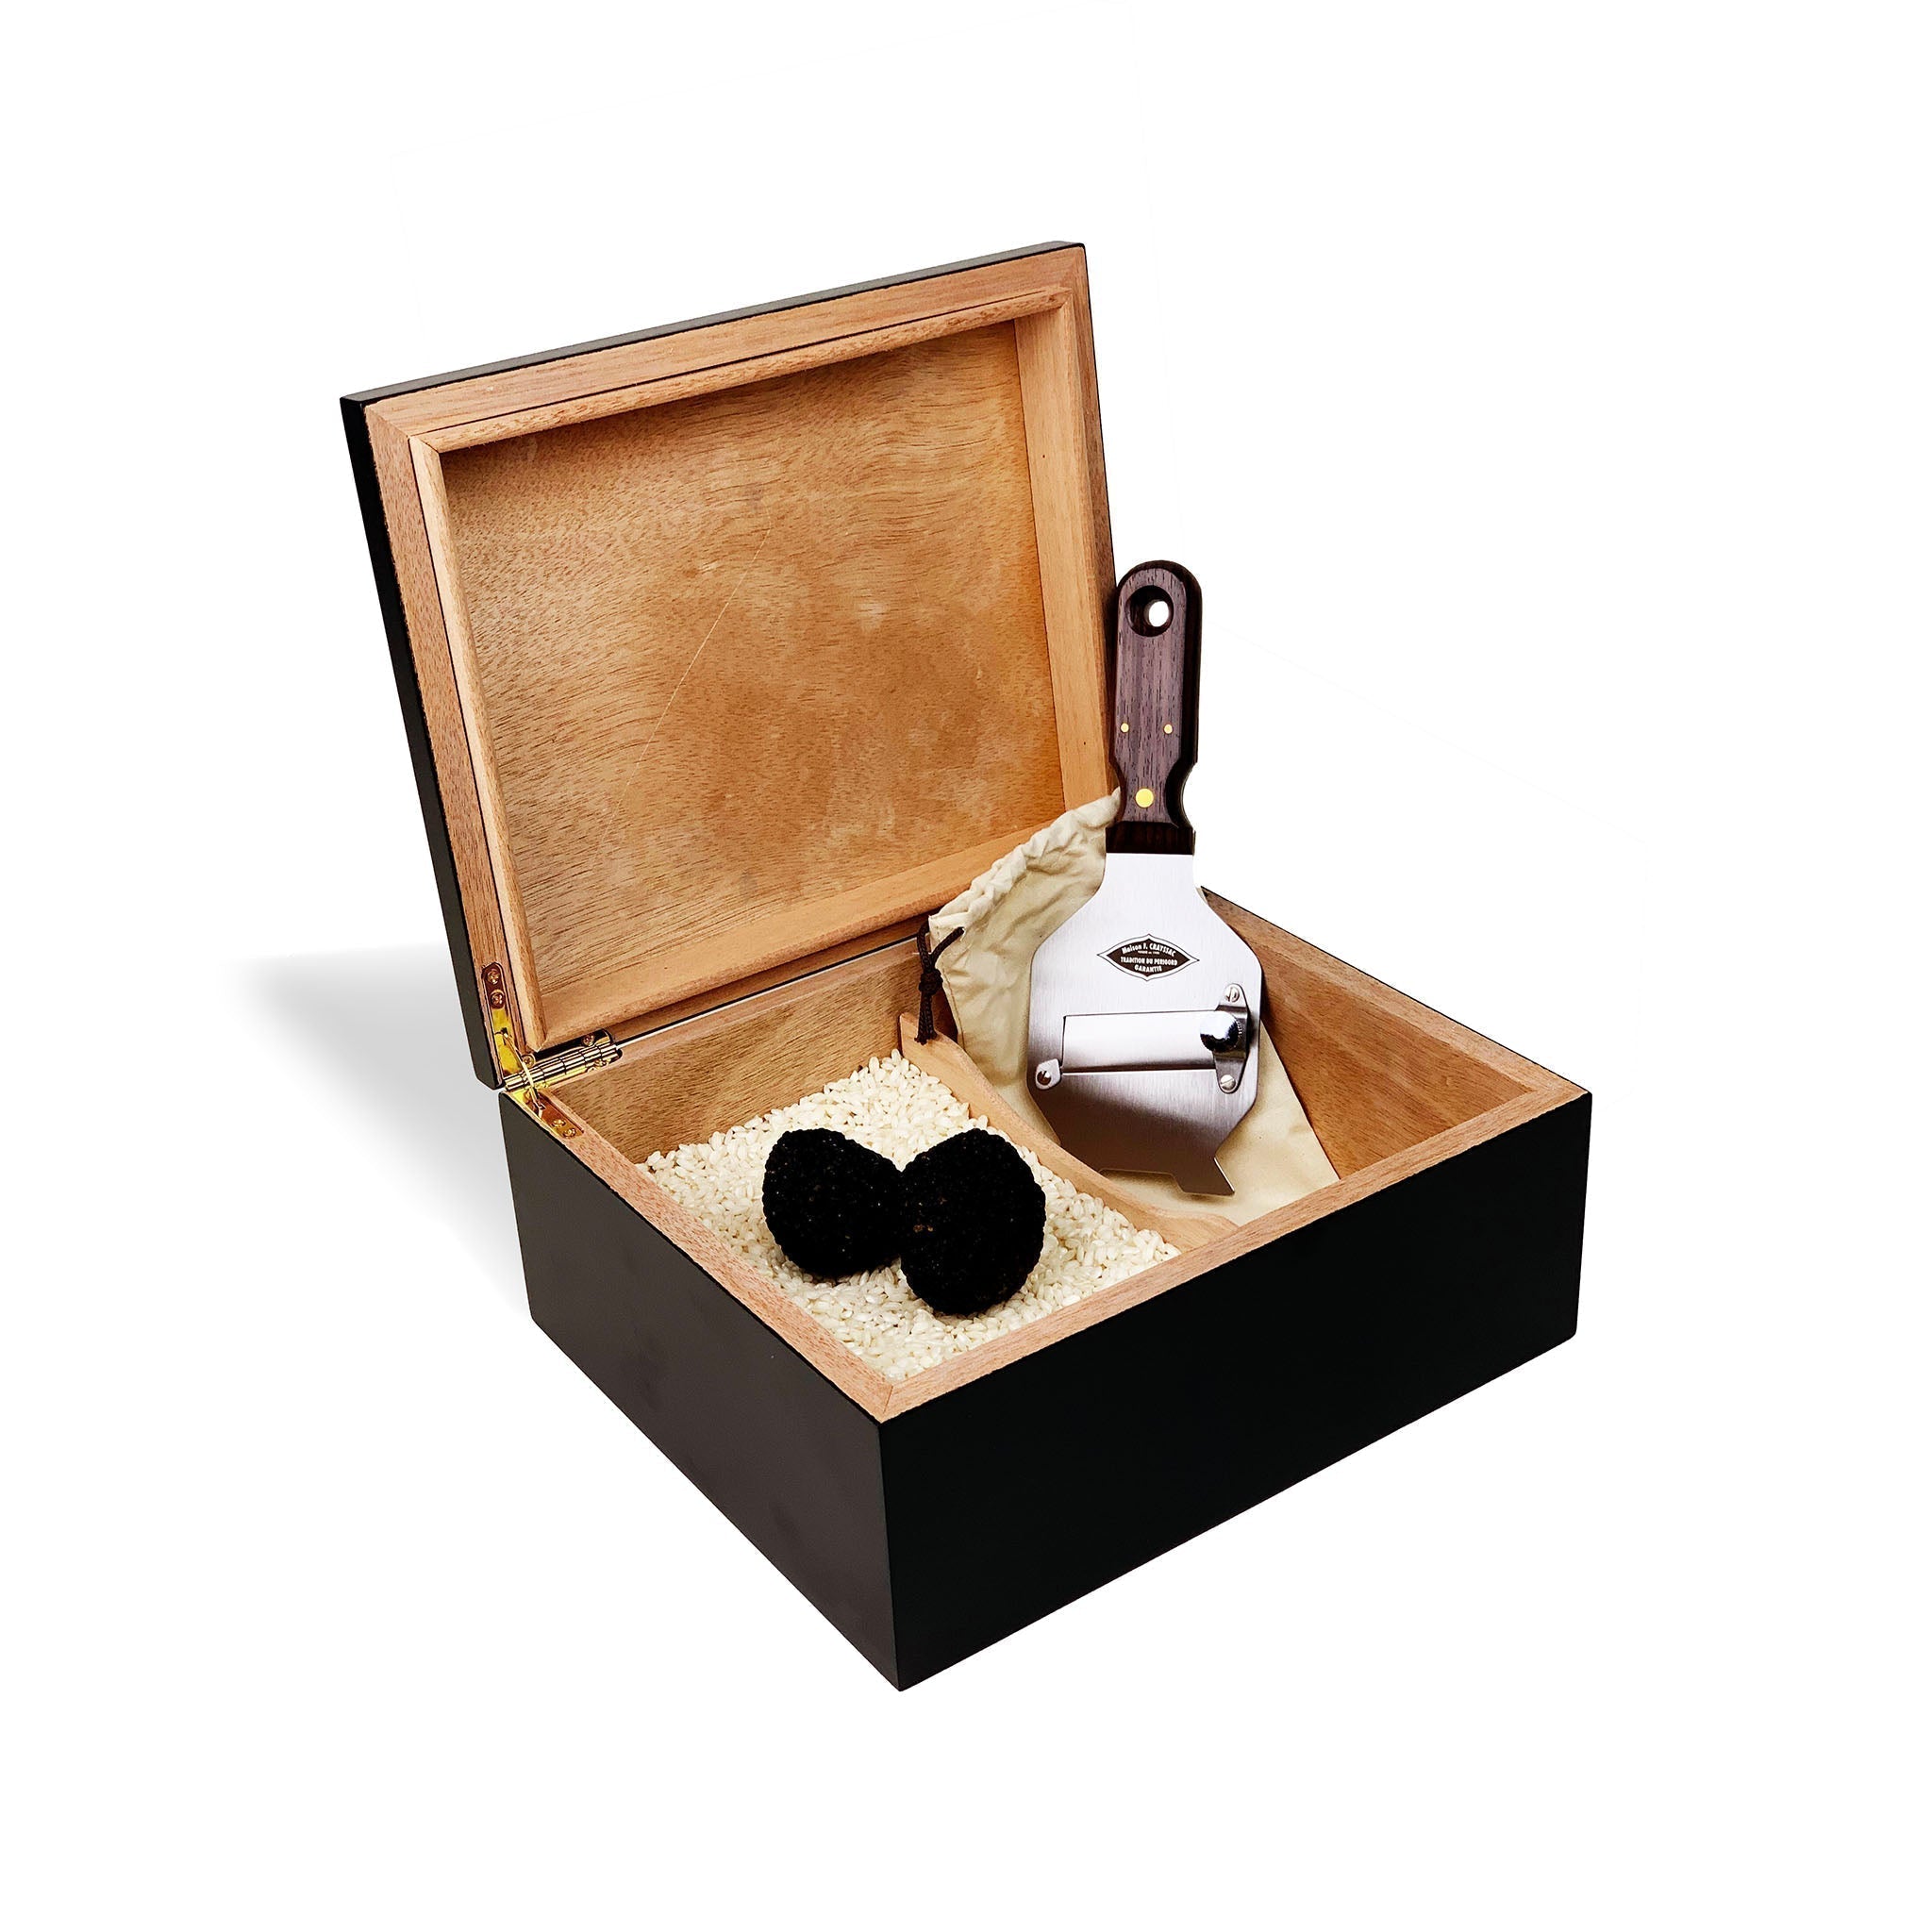 Wooden Truffle Box with 1lb Arborio Rice, and a stainless steel Truffle Slicer.